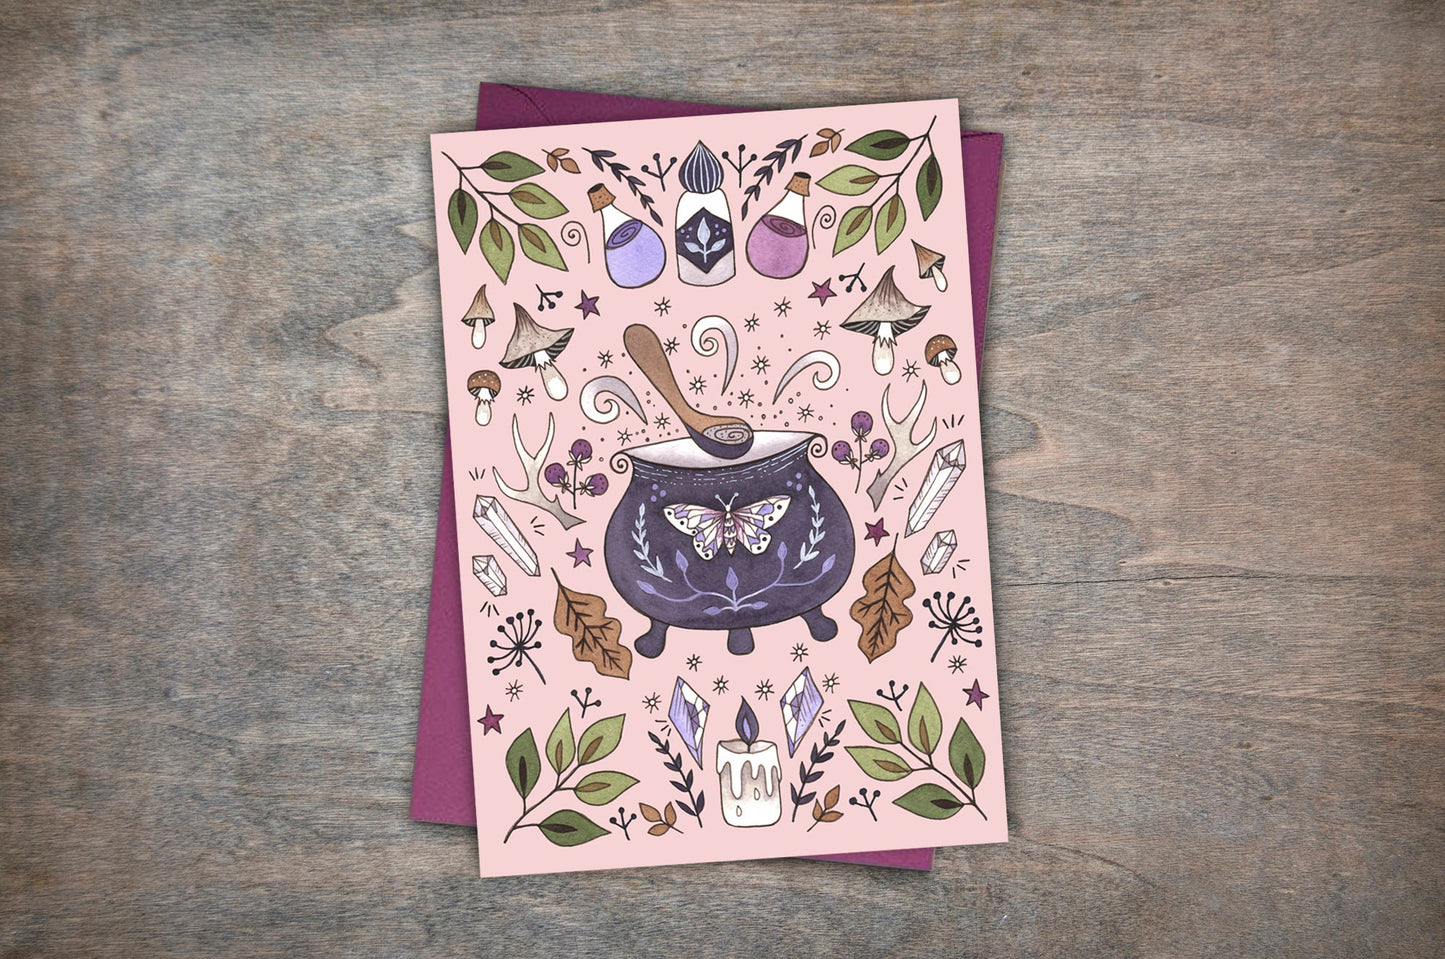 Kitchen Witch Greetings Card & Envelope - Cute Pink Witches Cauldron Card - Spring Botanical Ingredients Mushroom Toadstool Crystals Card